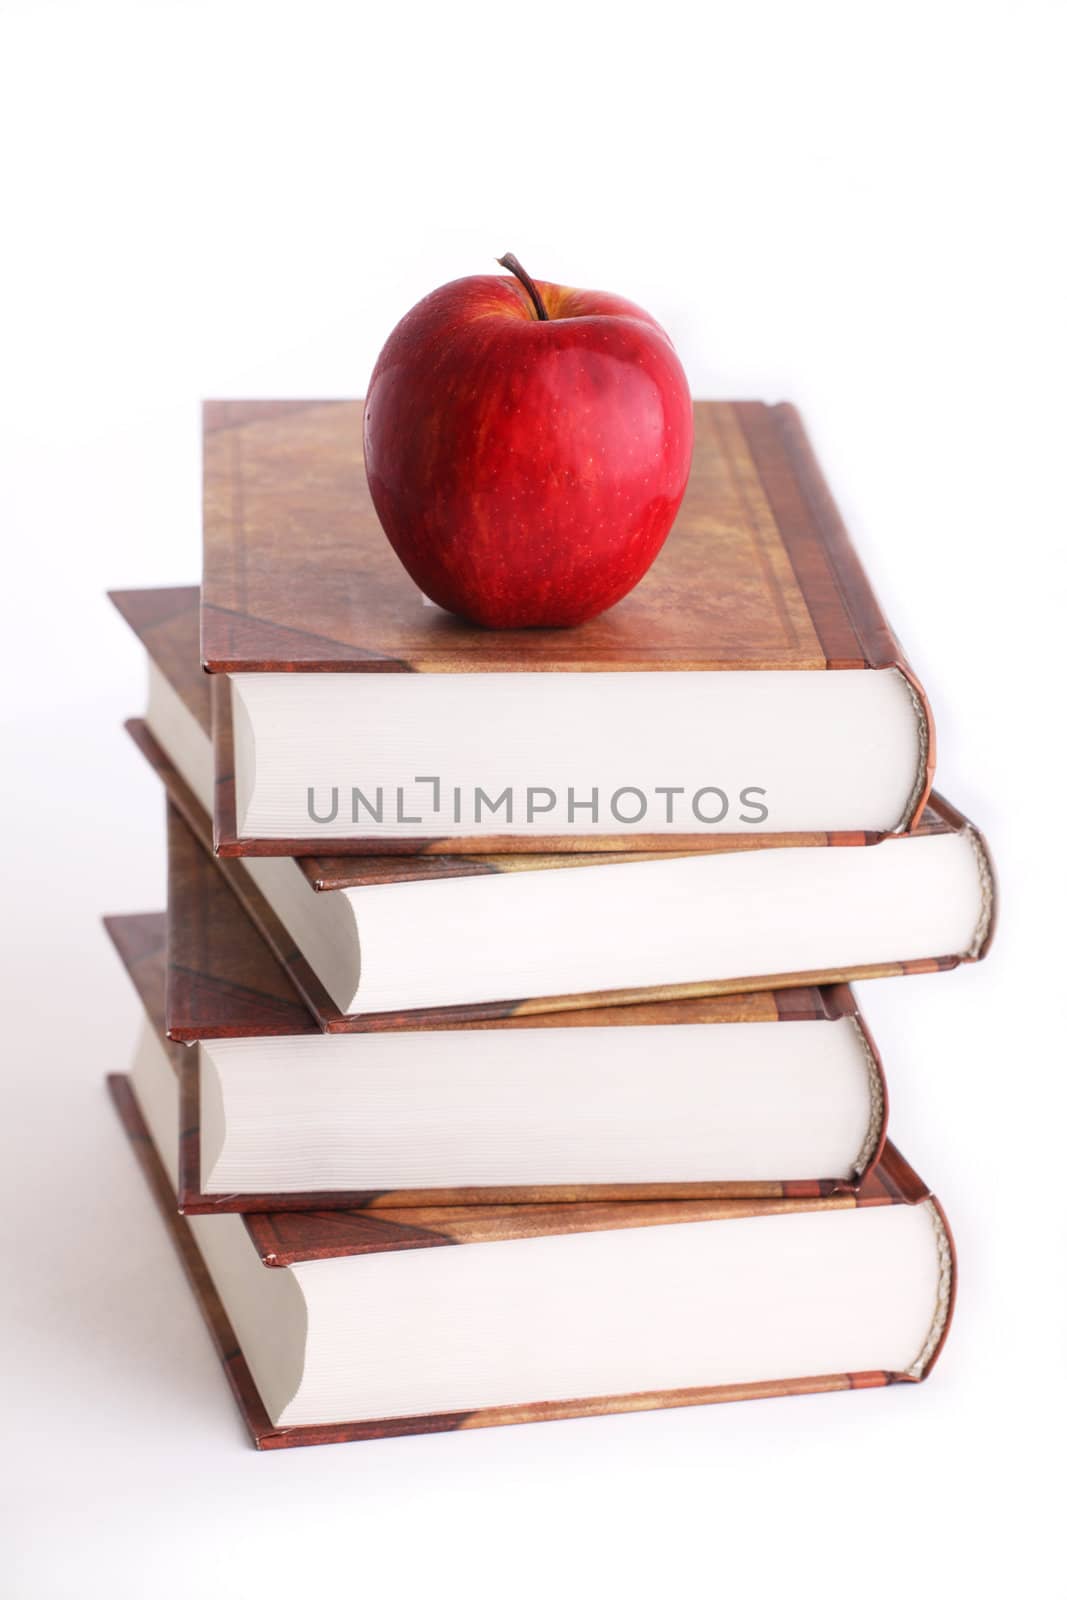 Red apple on the stack of the books by Aevathari